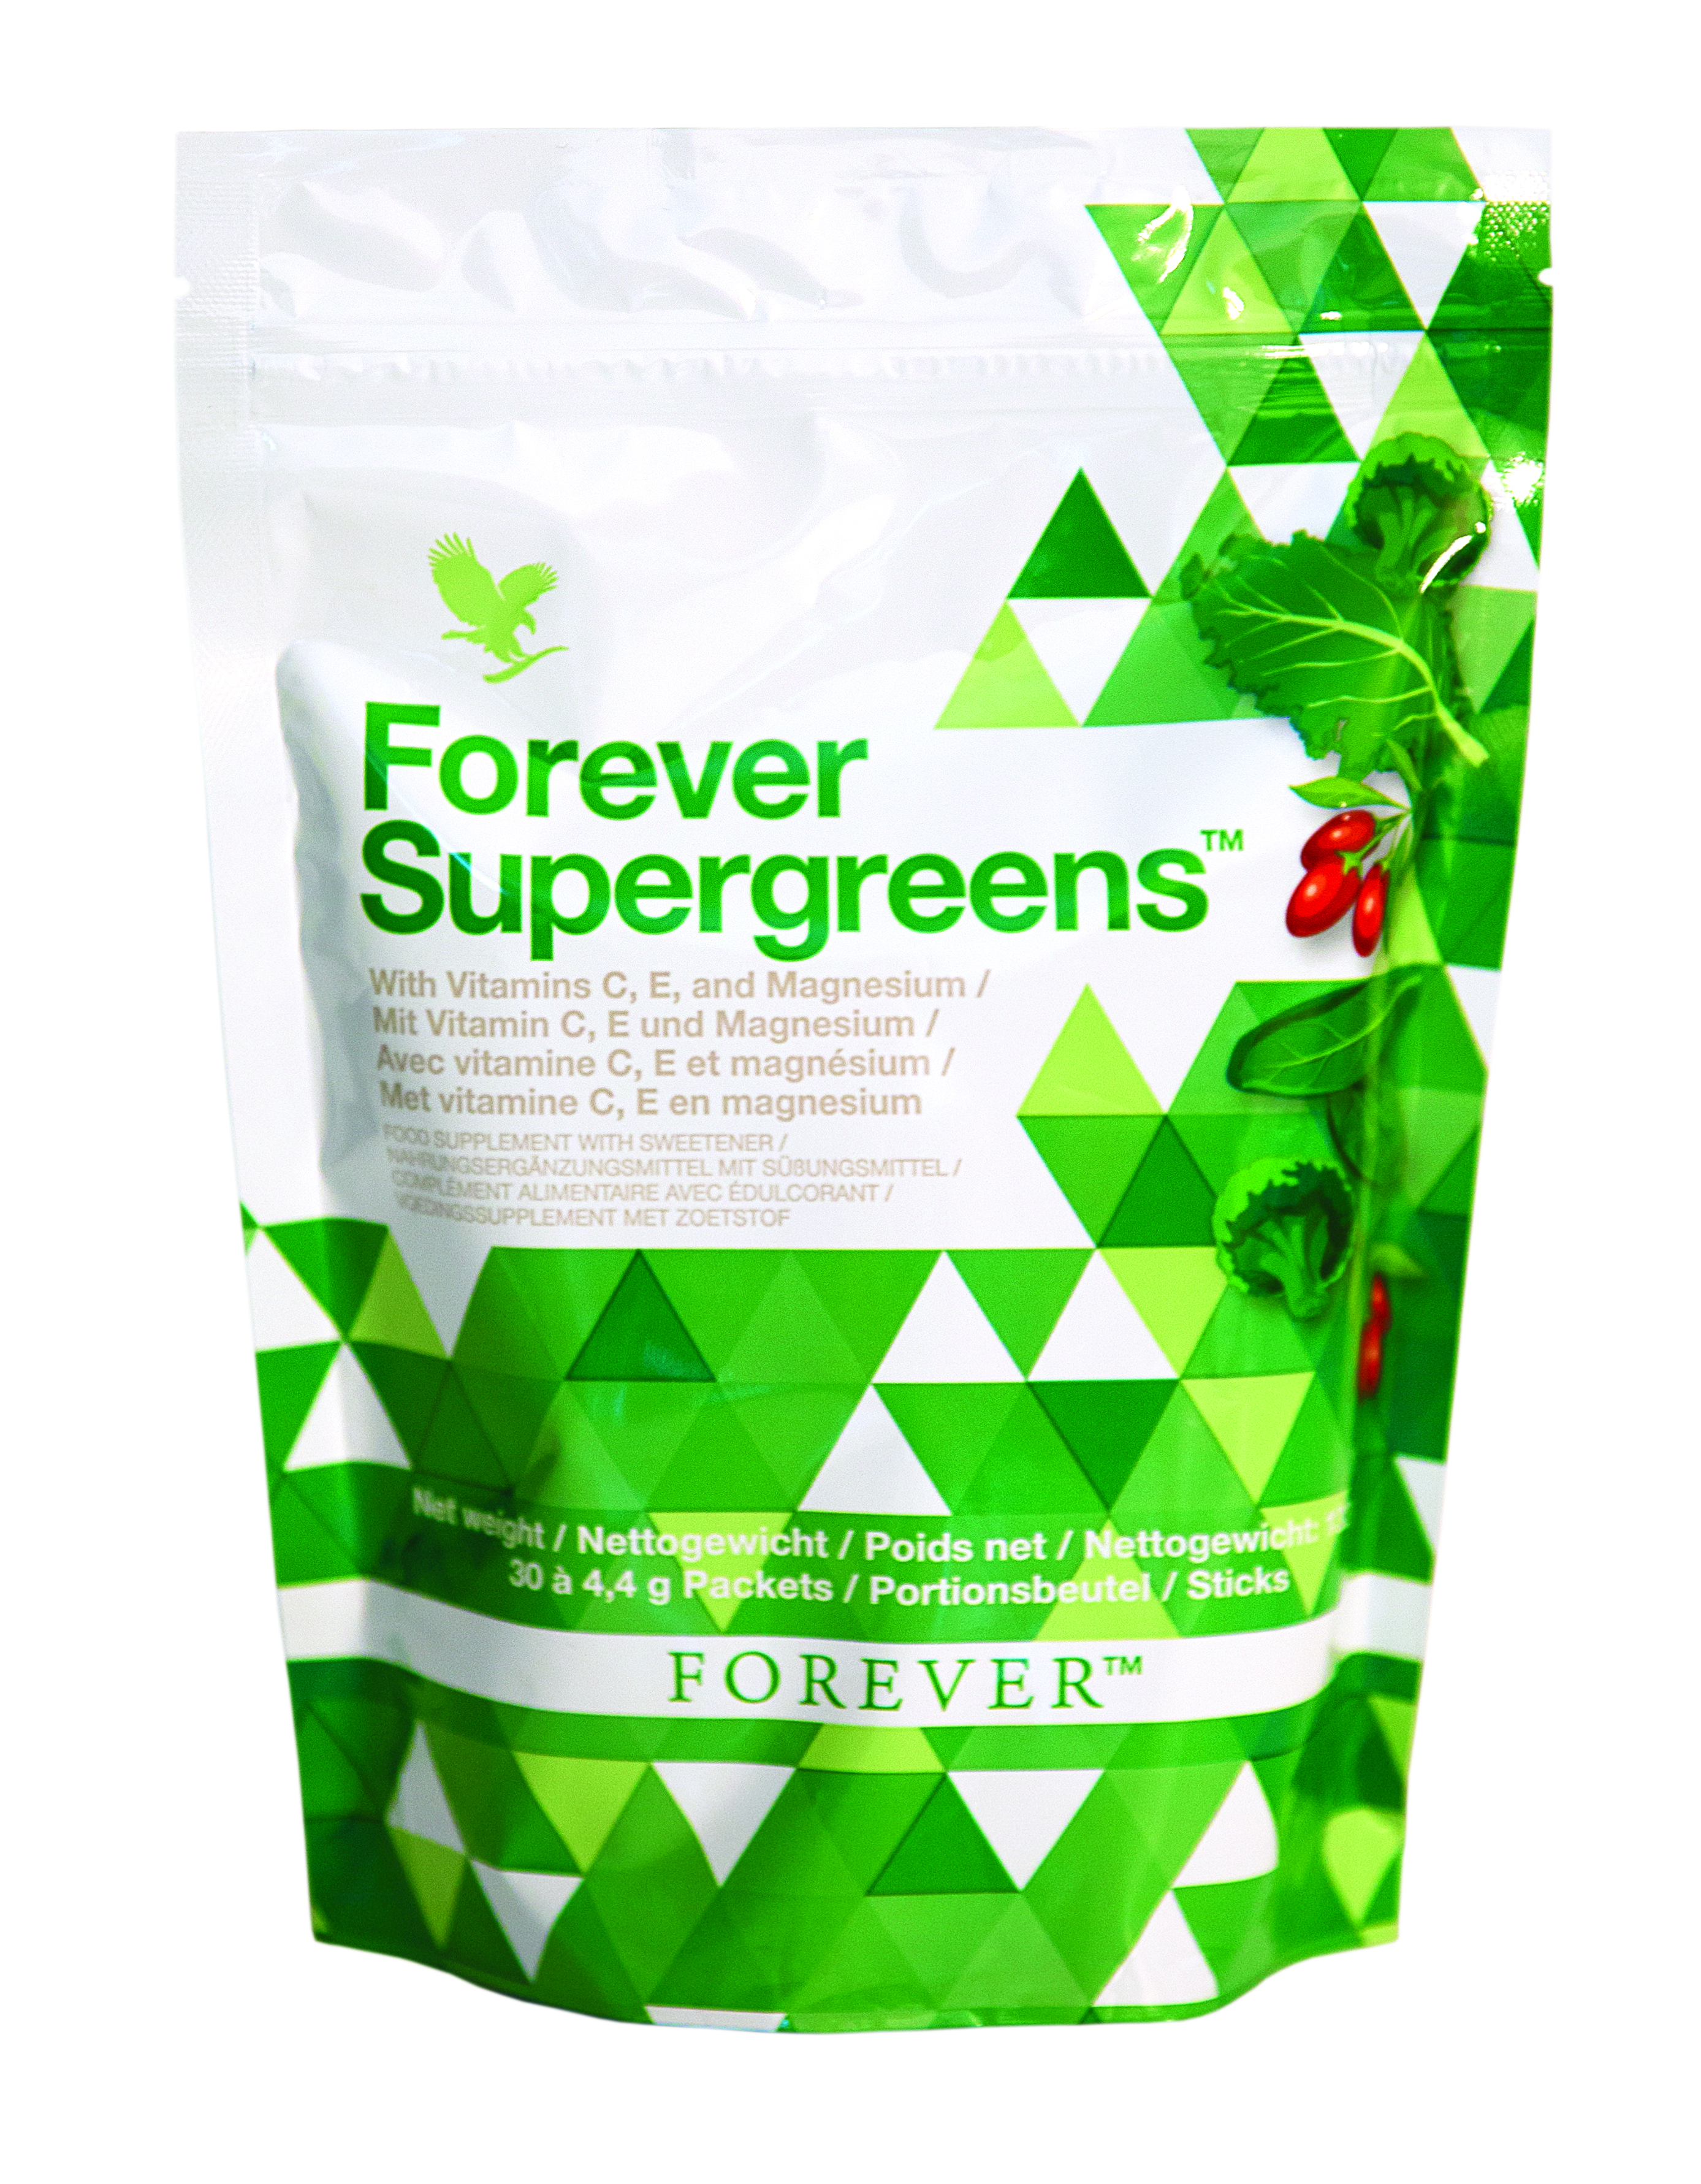 Forever Supergreens contains over twenty fruits and vegetables with vitamins C, E and magnesium to help keep your body fully powered for optimal performance*.
*Vitamin C contributes to the normal function of the immune system. Vitamin E contributes to the protection of cells from oxidative stress. Magnesium contributes to normal energy-yielding metabolism, reduction of tiredness and fatigue, electrolyte balance and psychological function.